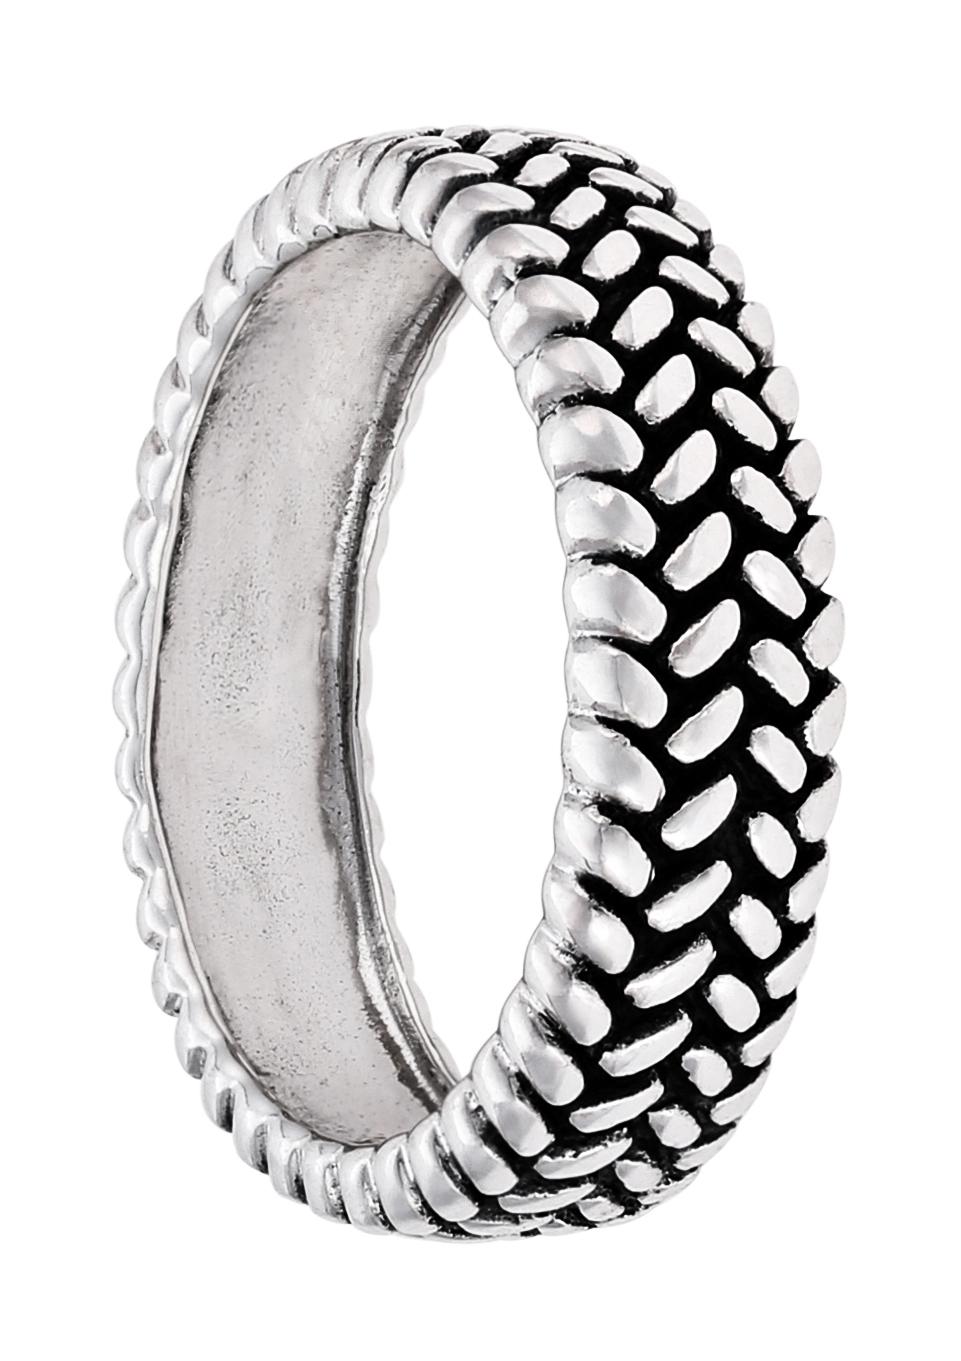 Ring - Silver Tyre